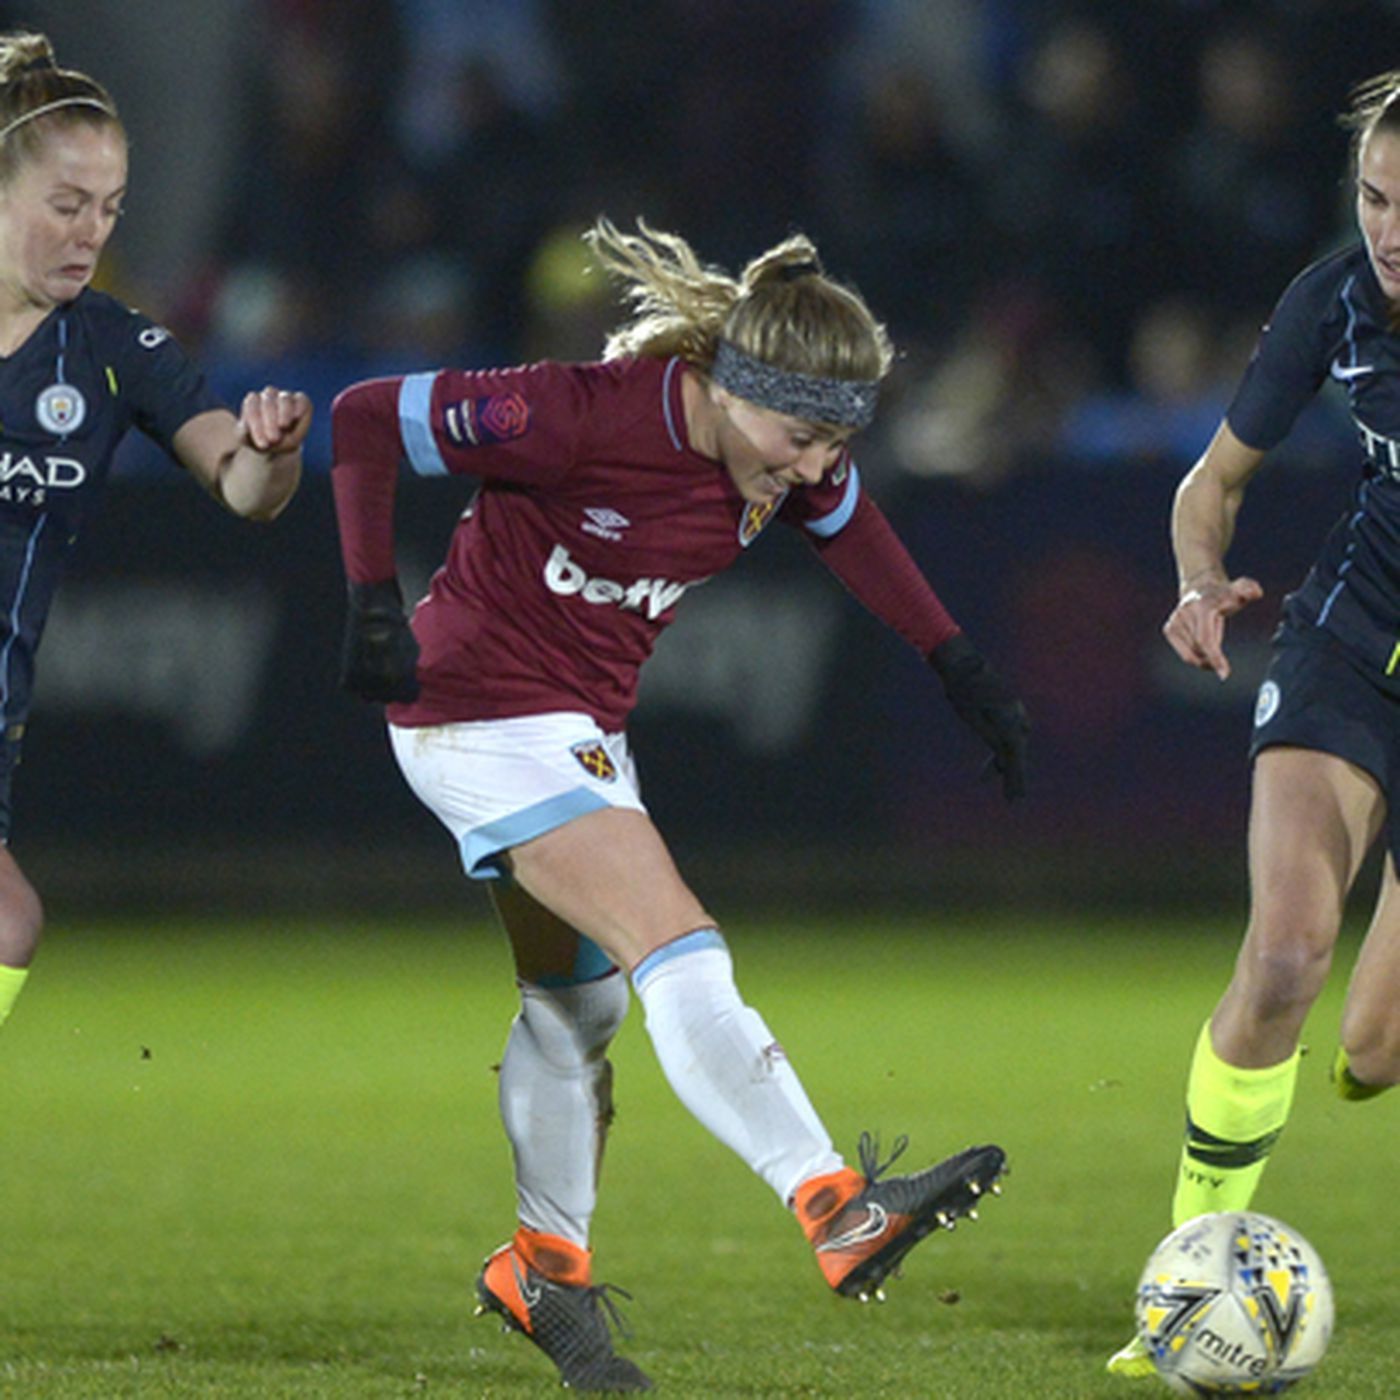 Persevering City Women overcome Hammers and Blue